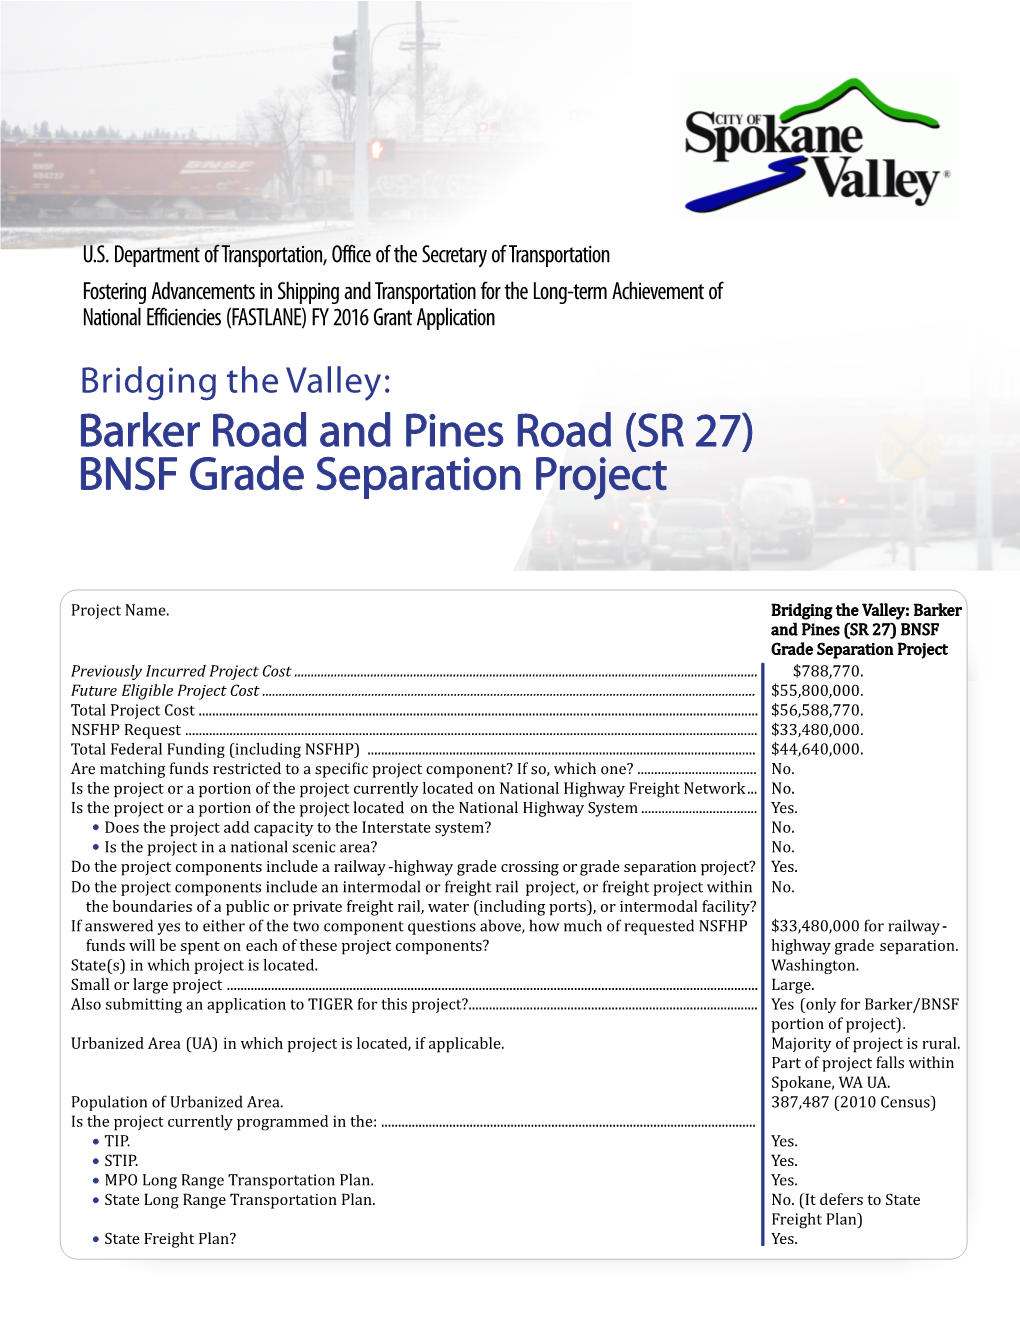 Barker Road and Pines Road (SR 27) BNSF Grade Separation Project